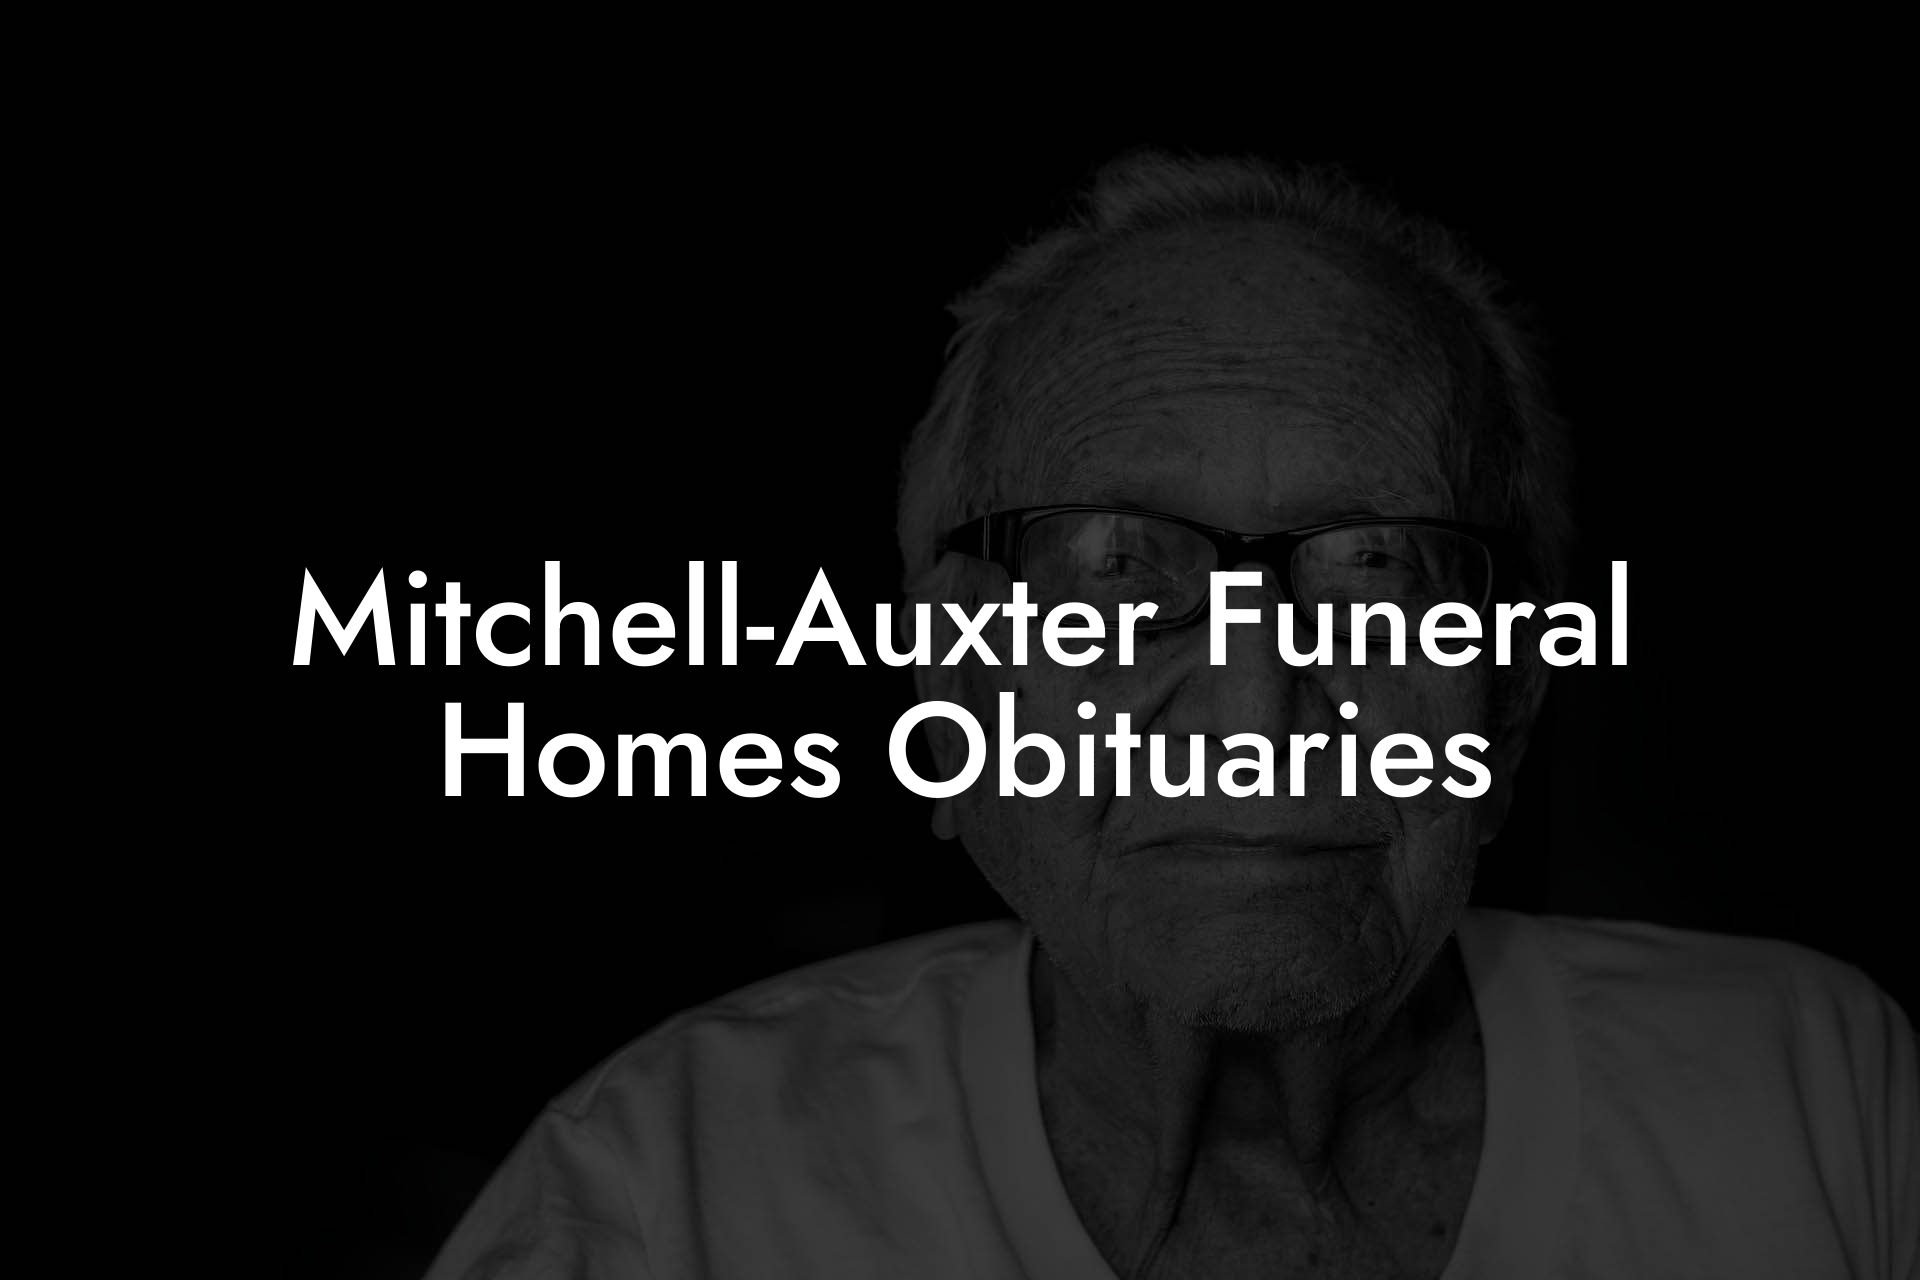 Mitchell-Auxter Funeral Homes Obituaries